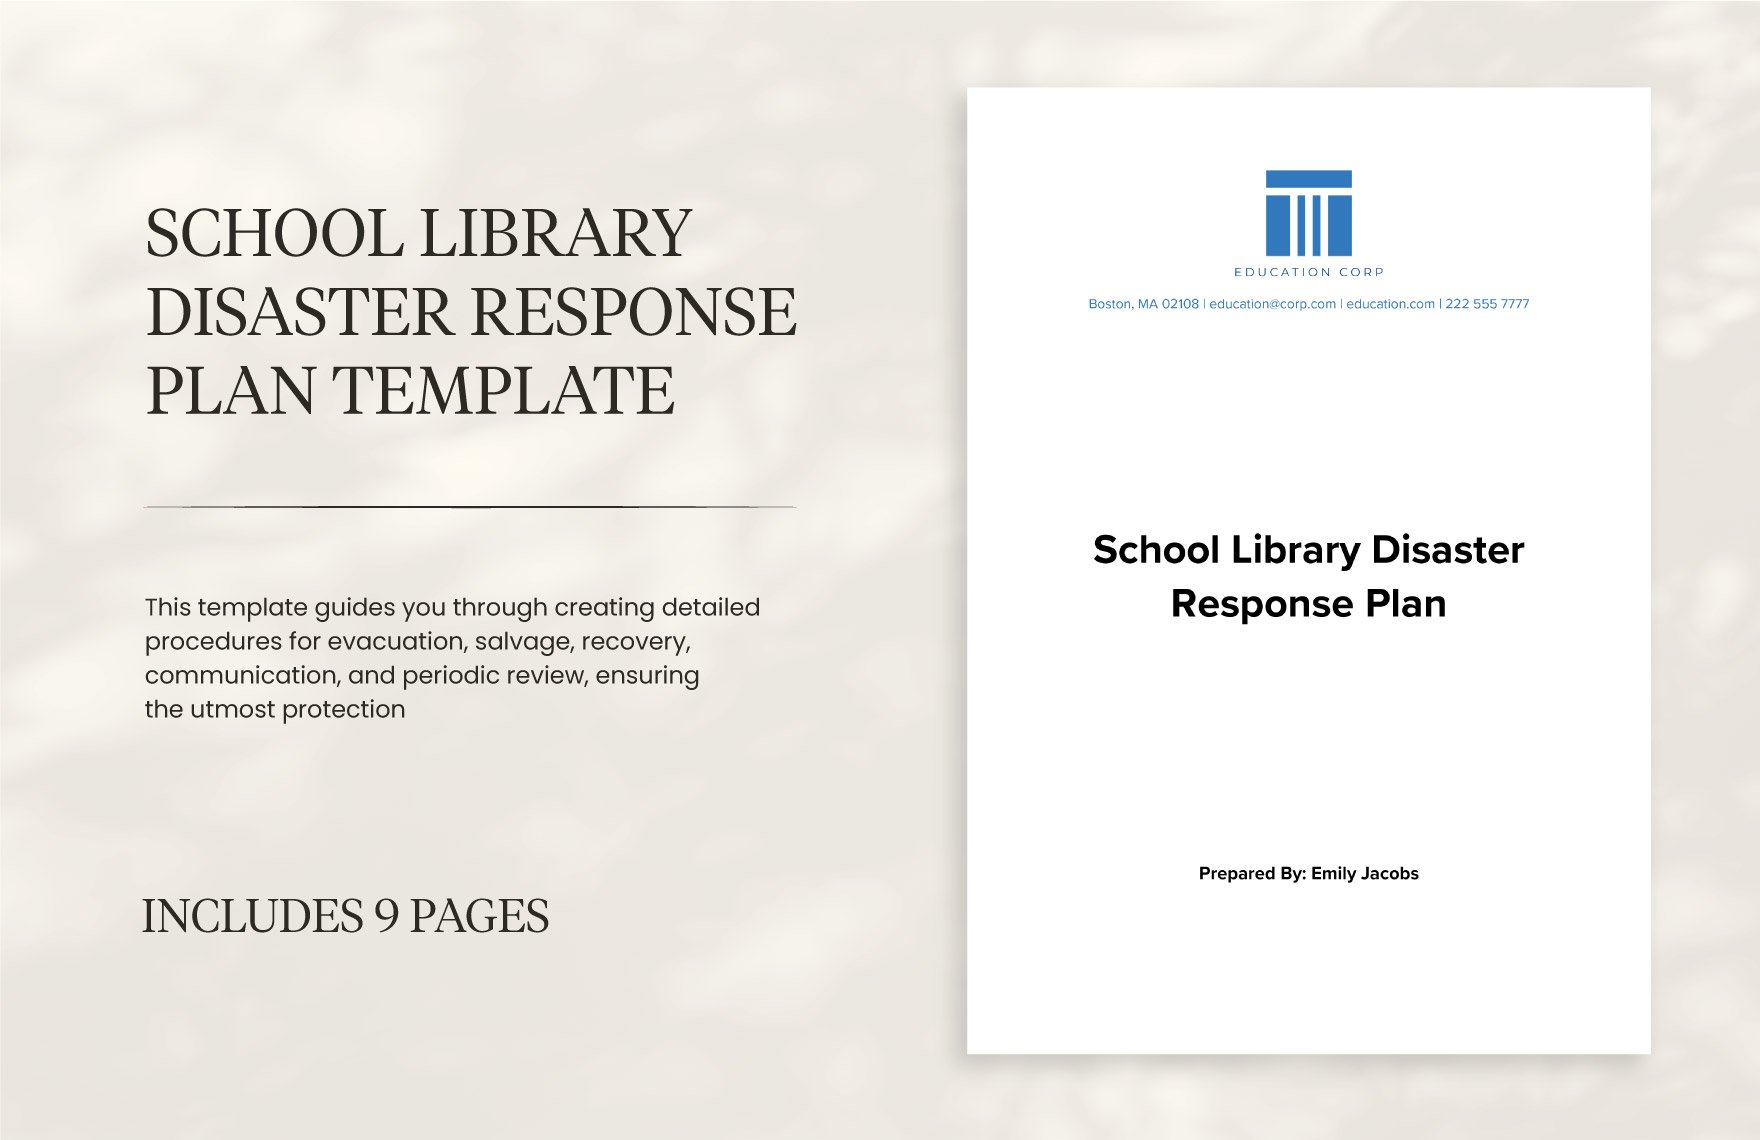 School Library Disaster Response Plan Template in Word, Google Docs, PDF